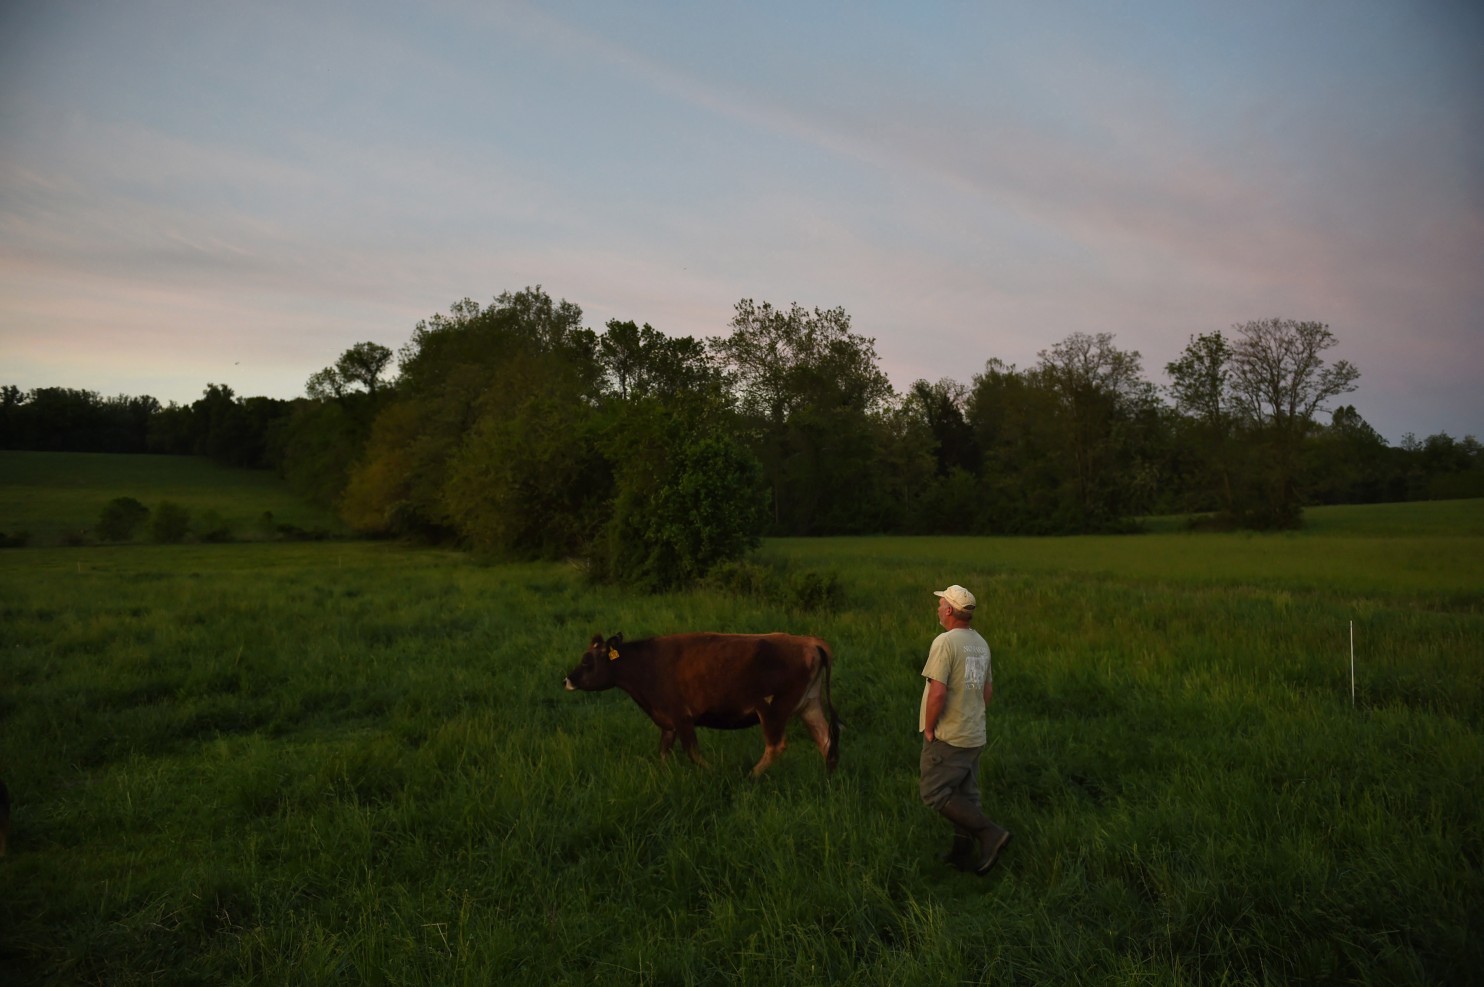 Bobby Prigel rounds up cows in 2015 in Glen Arm, Md. (Matt McClain/The Washington Post)